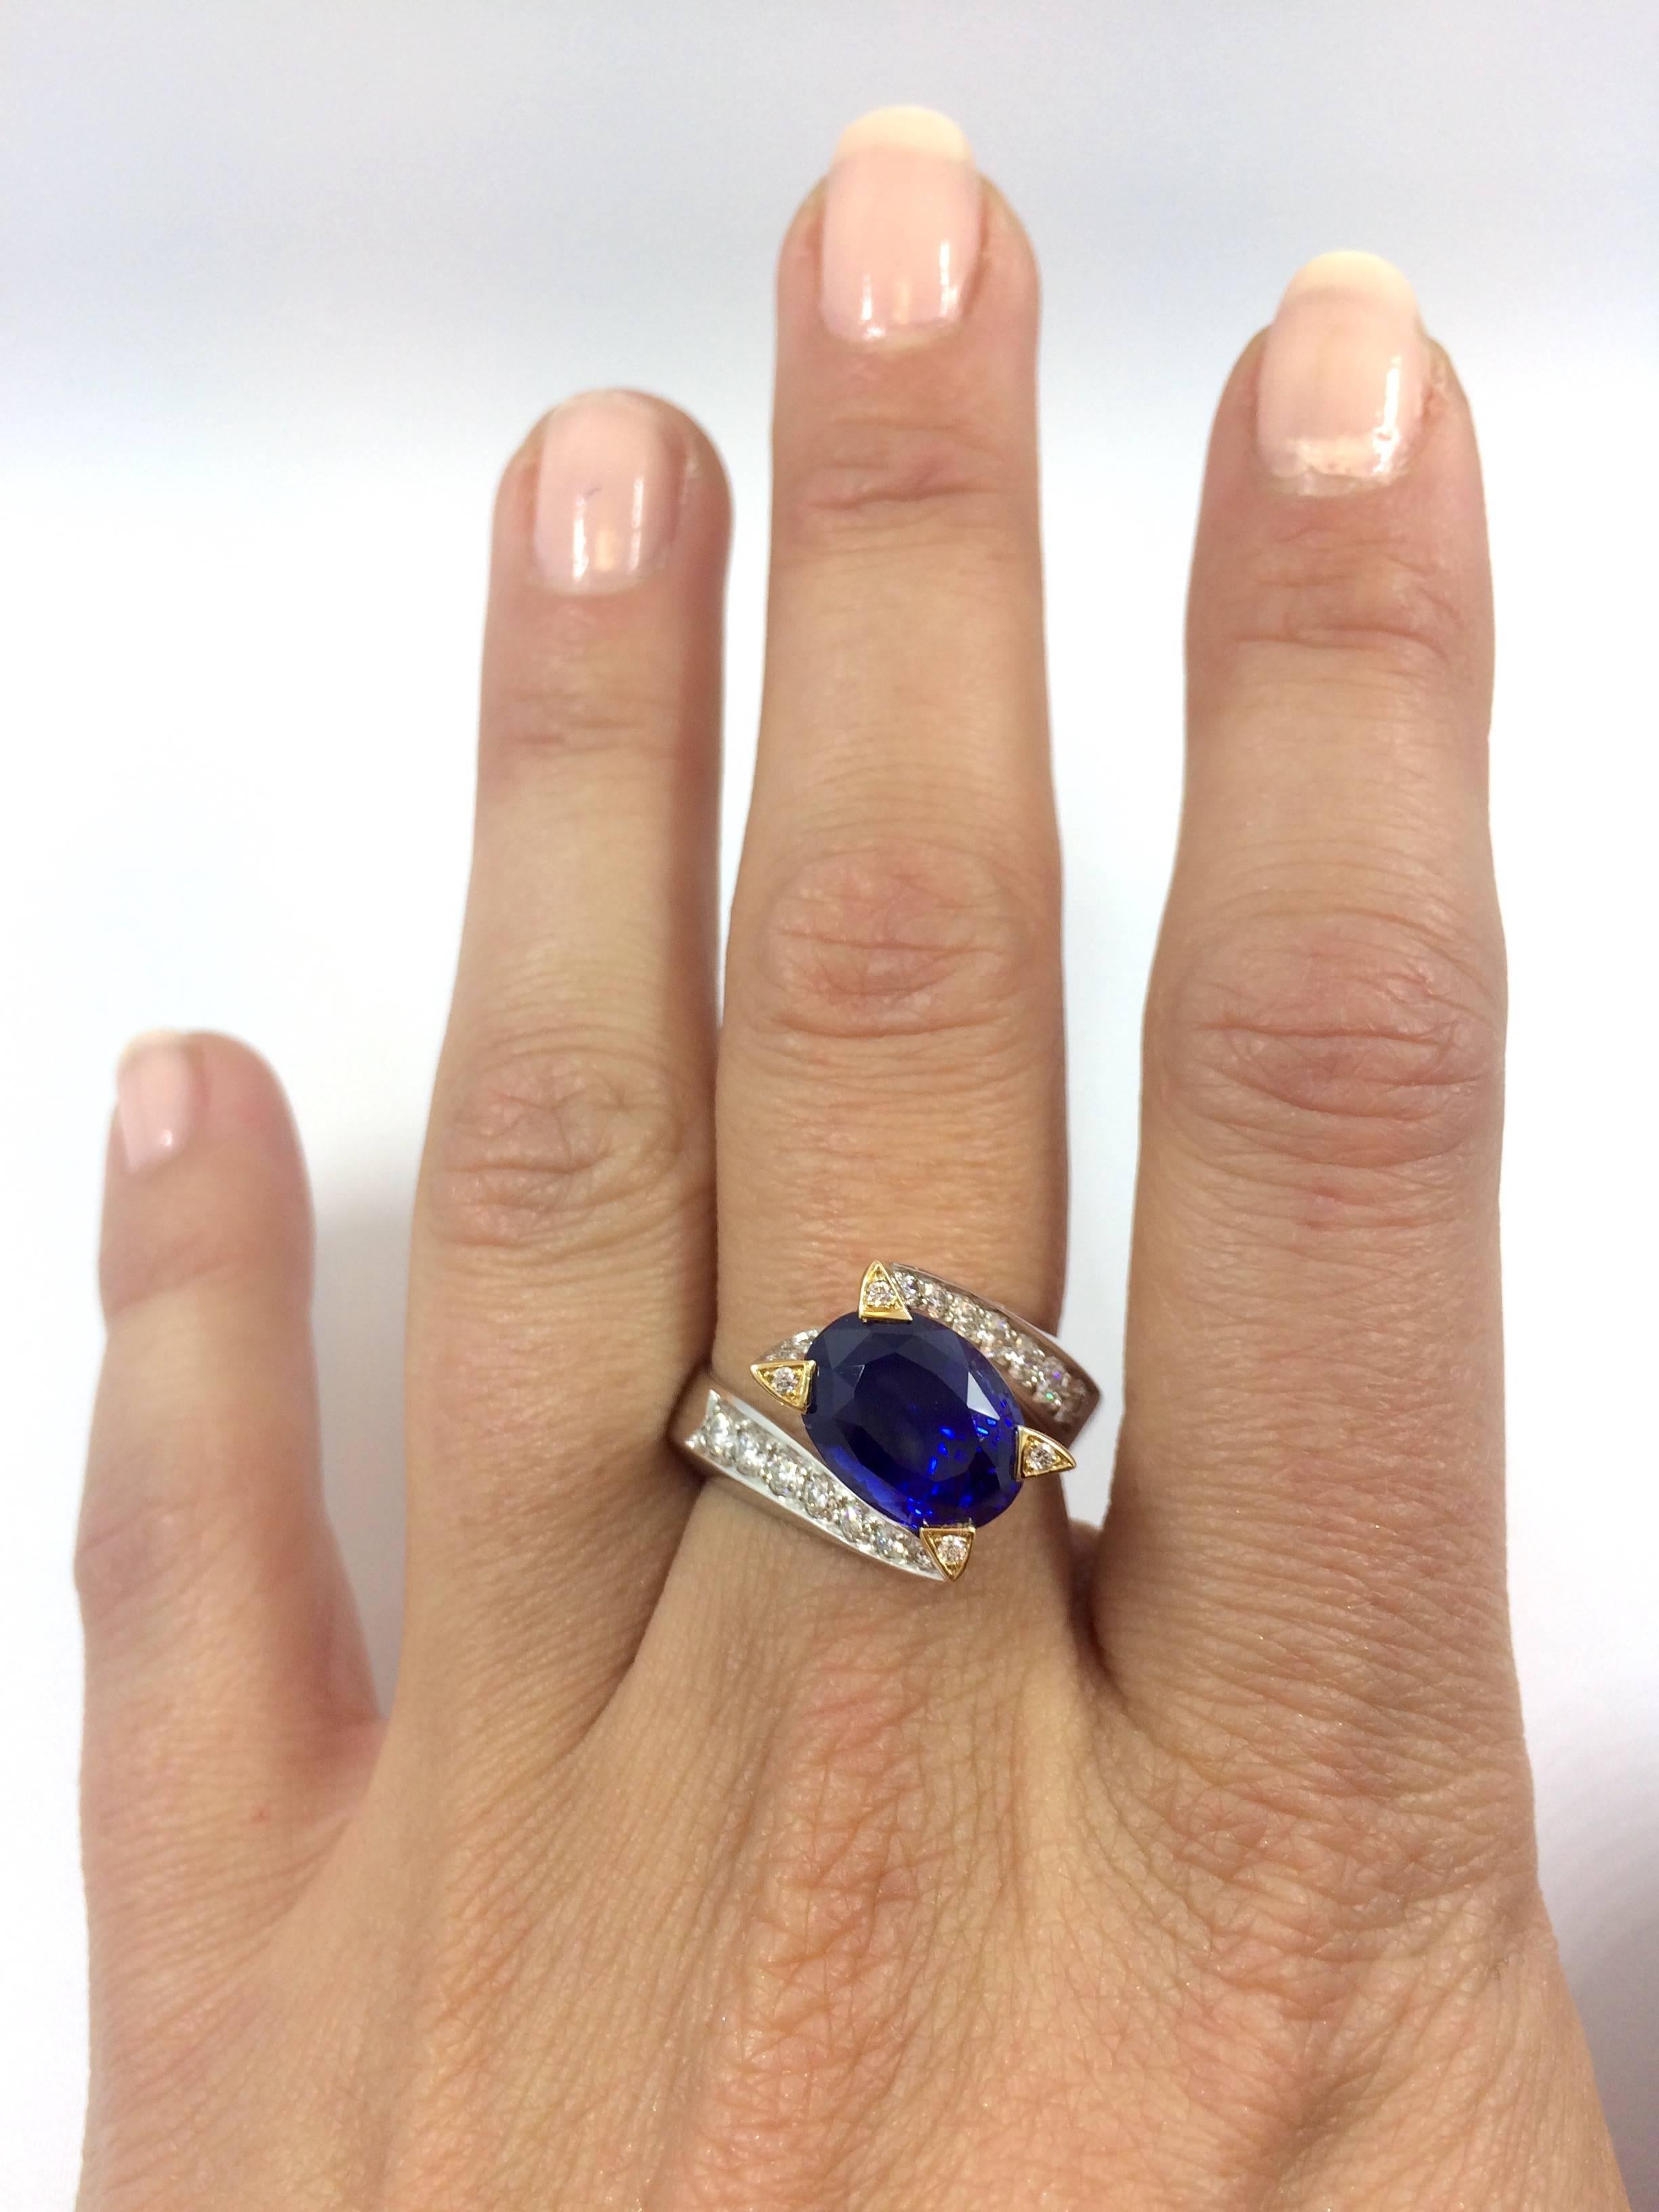 A unique white and yellow gold ring set with an exceptional and rare unheated Burma Royal Blue oval sapphire. The sapphire is surrounded by 20 brilliants cut diamonds set on the body of the twisted ring. As well as four brilliant cut diamonds are